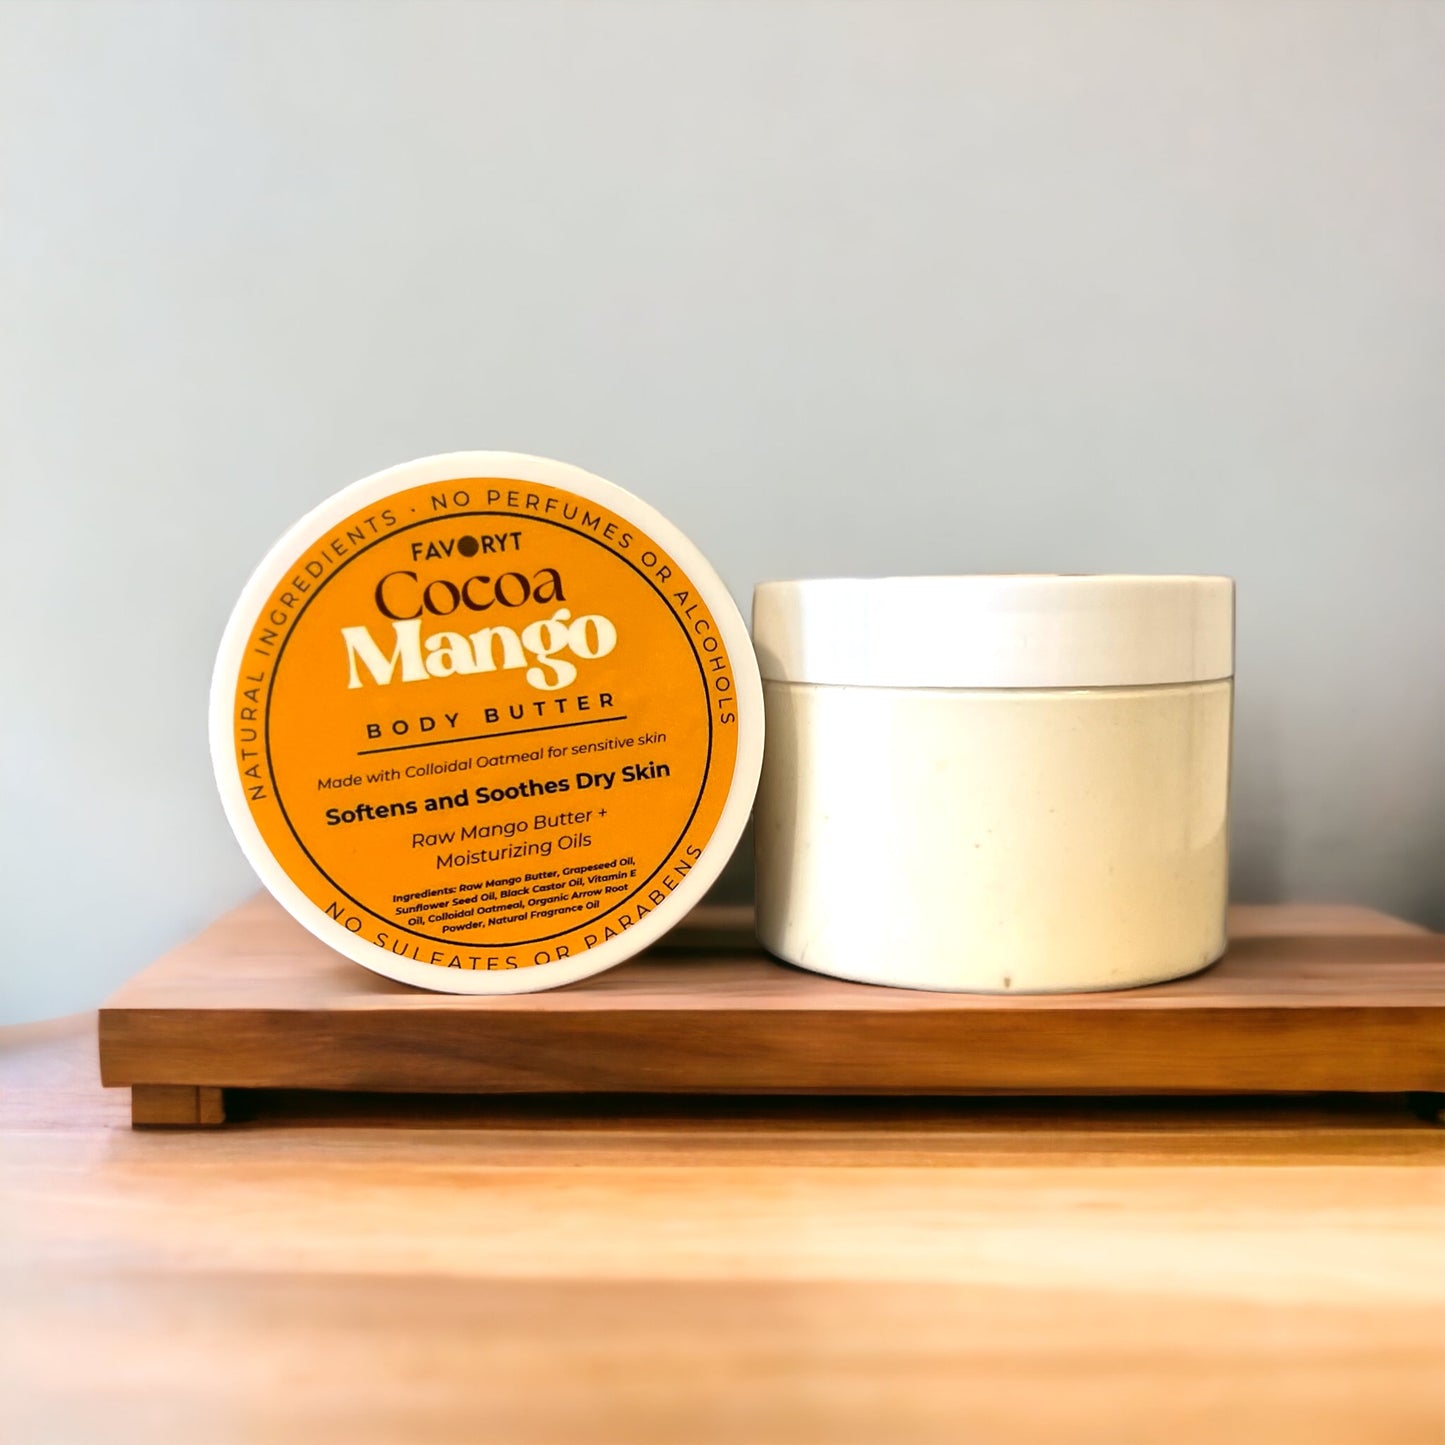 FAVORYT Cocoa Mango Body Butter